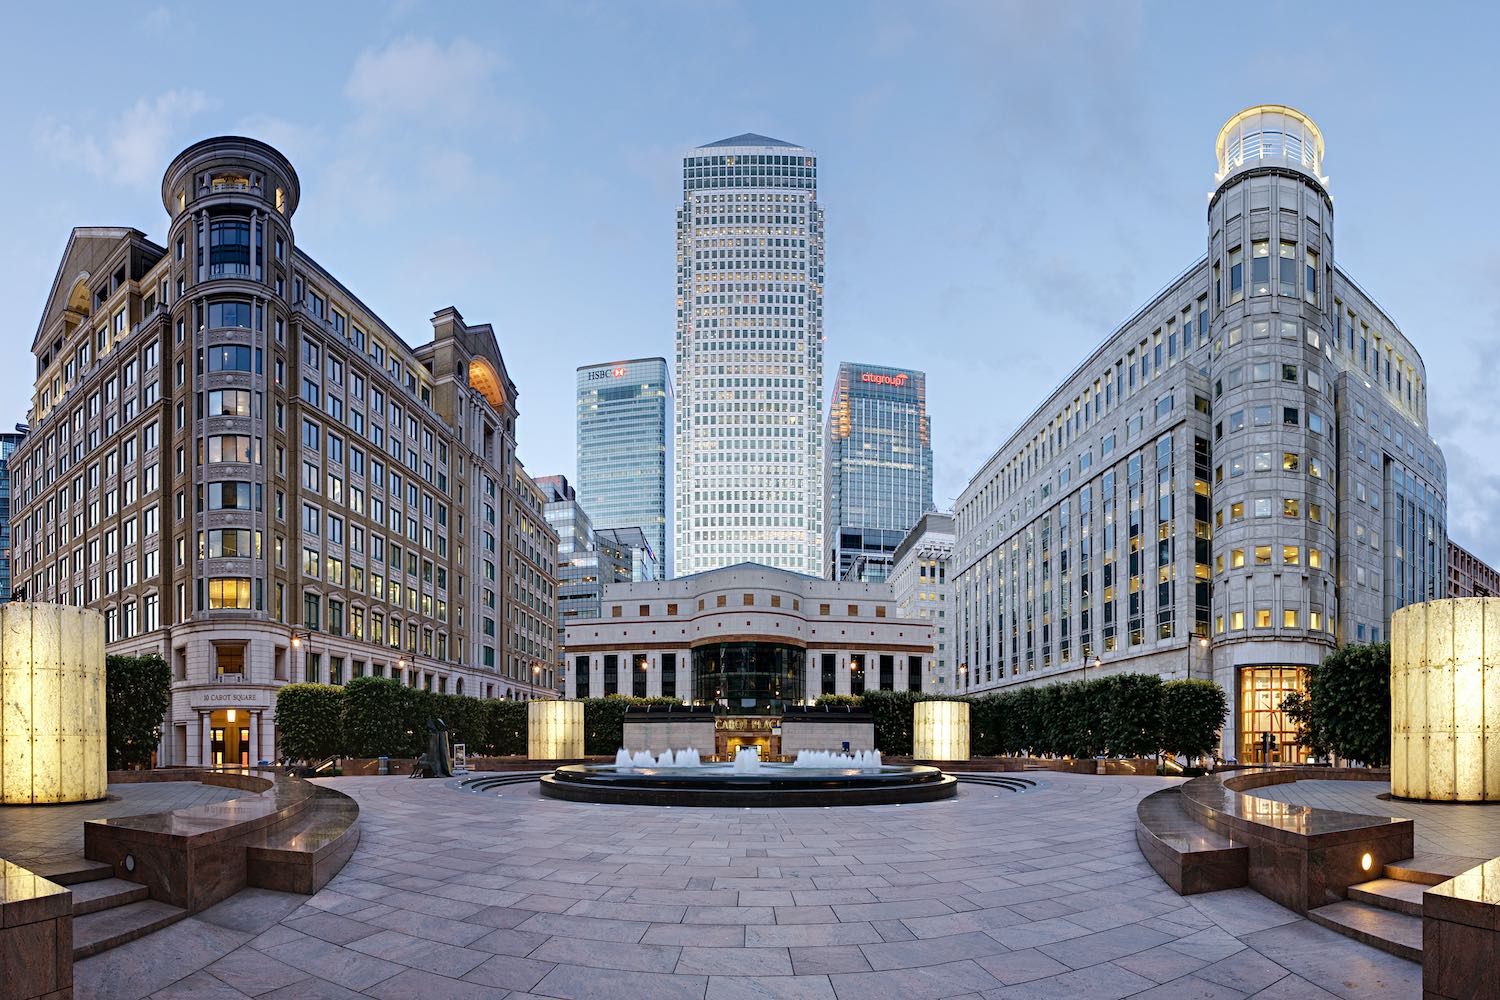 Cabot Square in Canary Wharf at evening